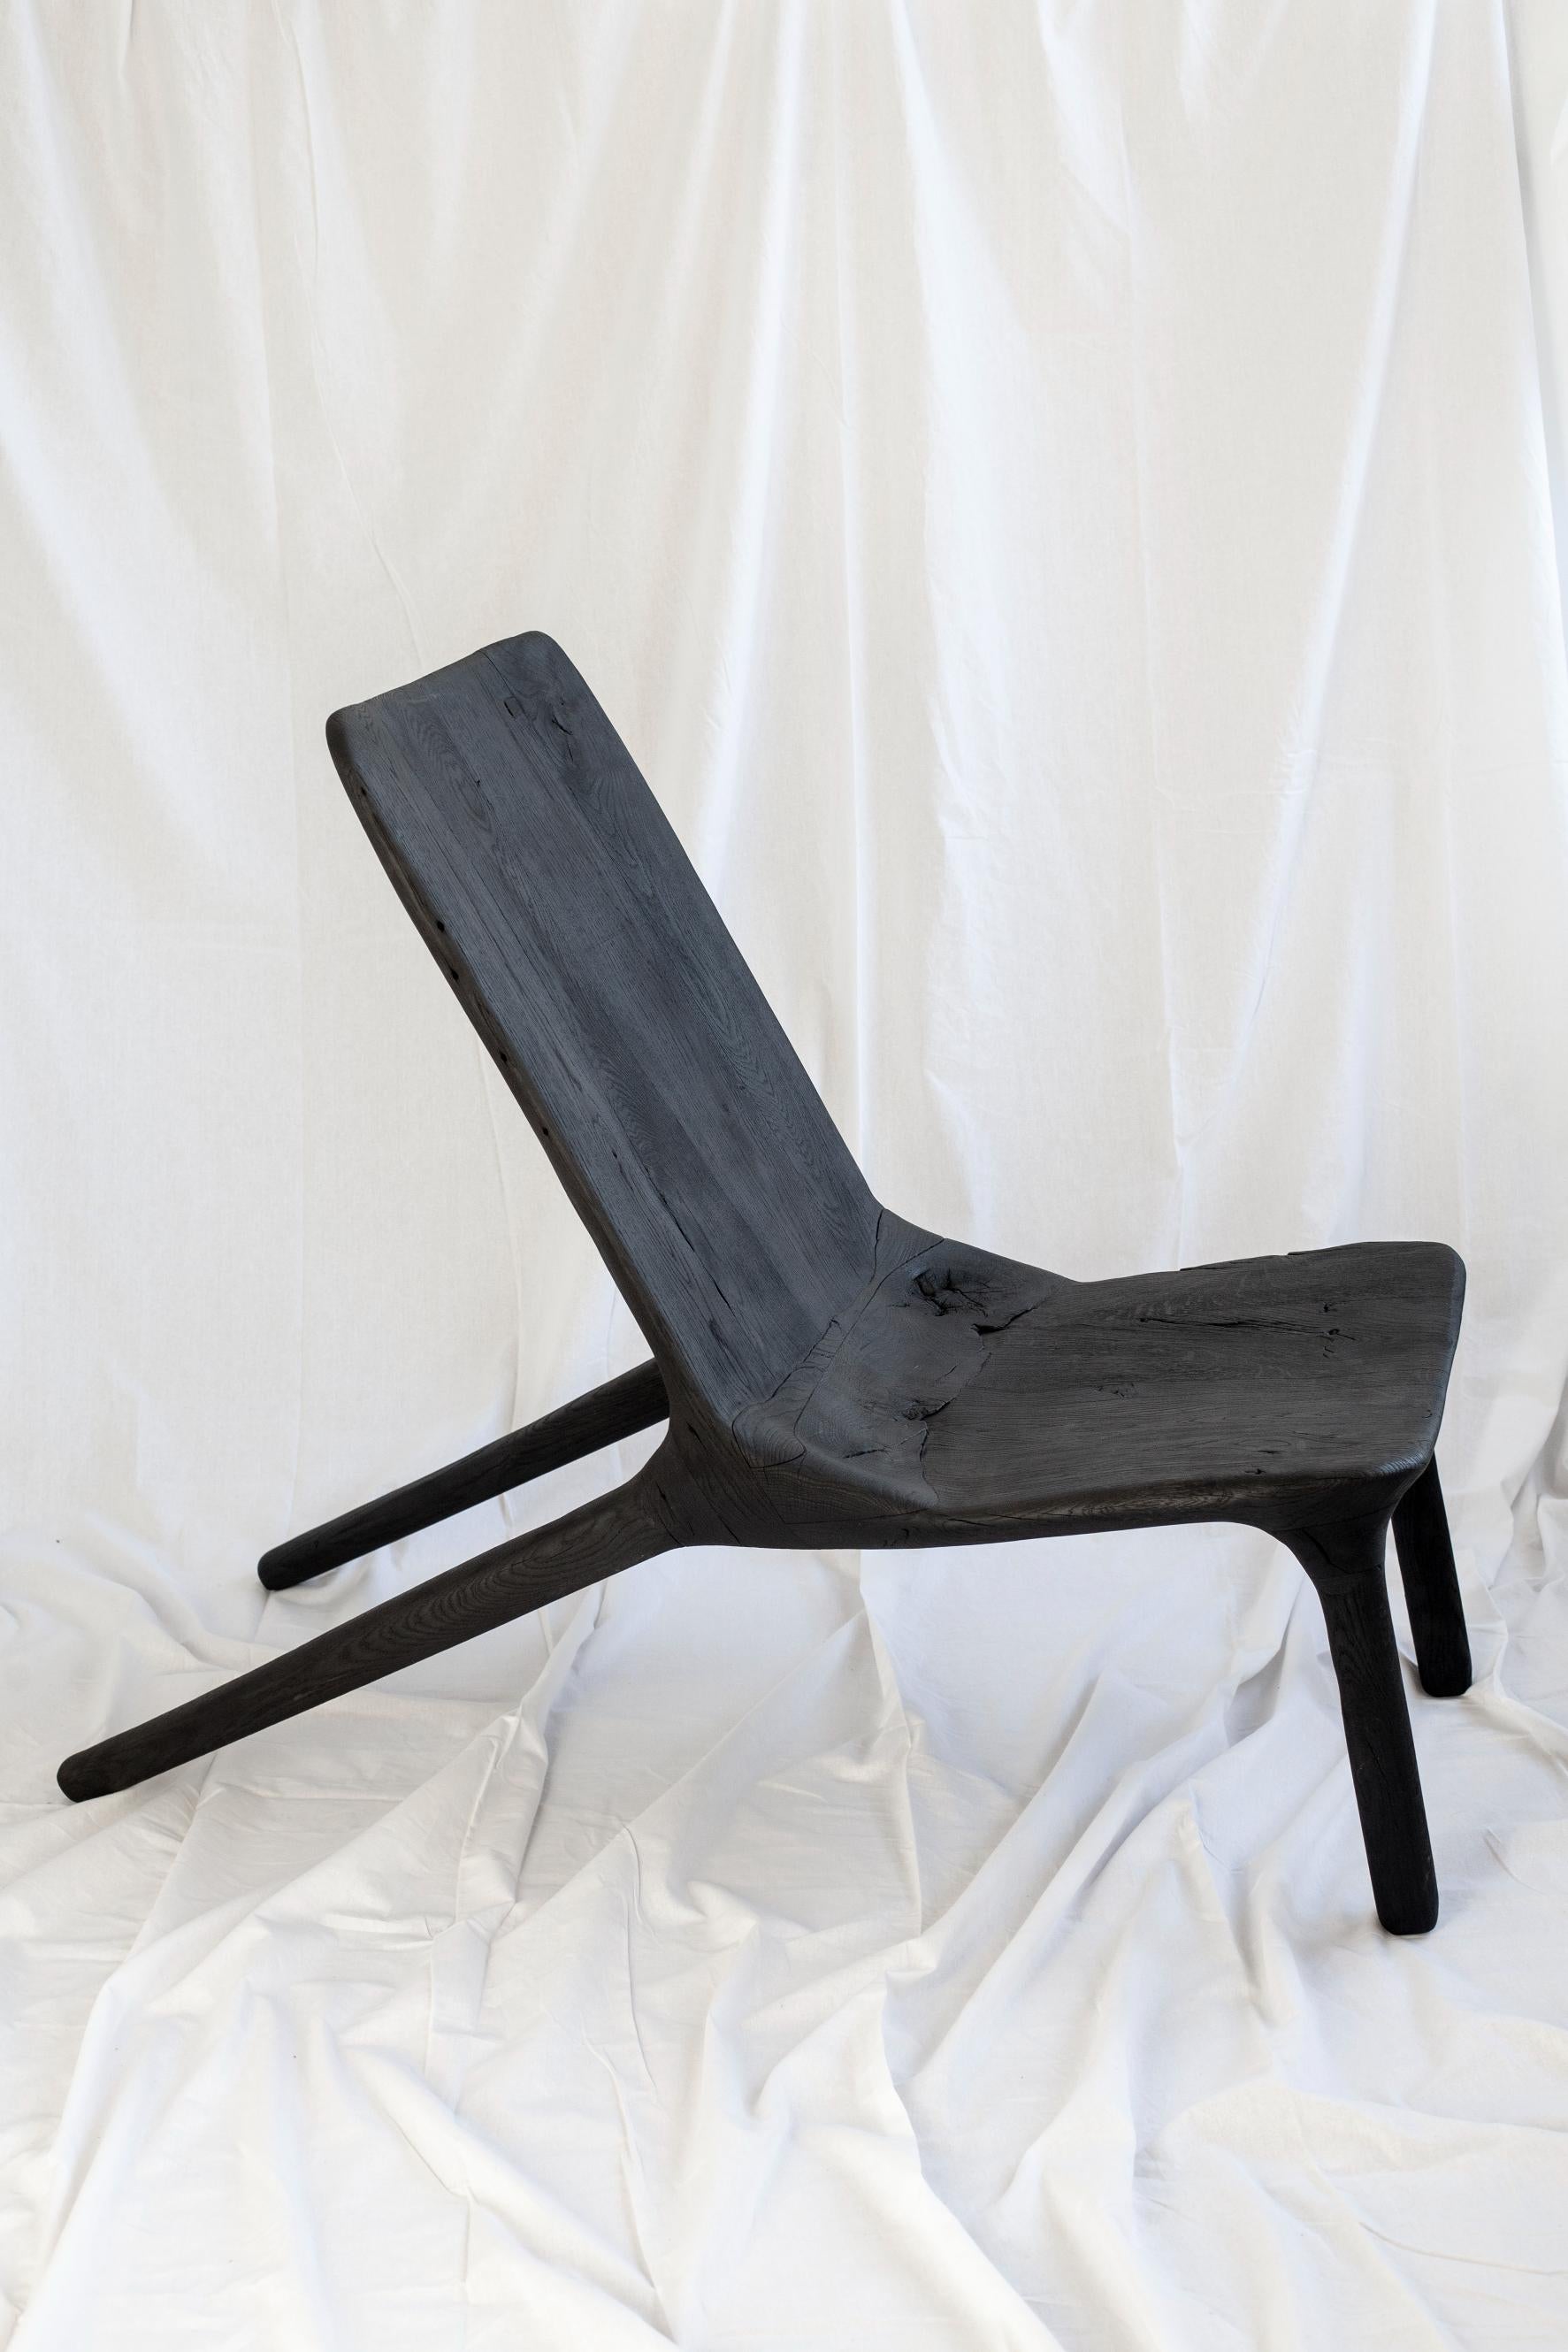 Chair Eclipse by Antoine Maurice
Dimensions: W 120 x D 85 x H 55 cm
Materials: Solid oak beams, assembled, carved and burned


Ethnic-inspired, the Eclipse range of furniture gives pride of place to primitive lines… as well as recycled